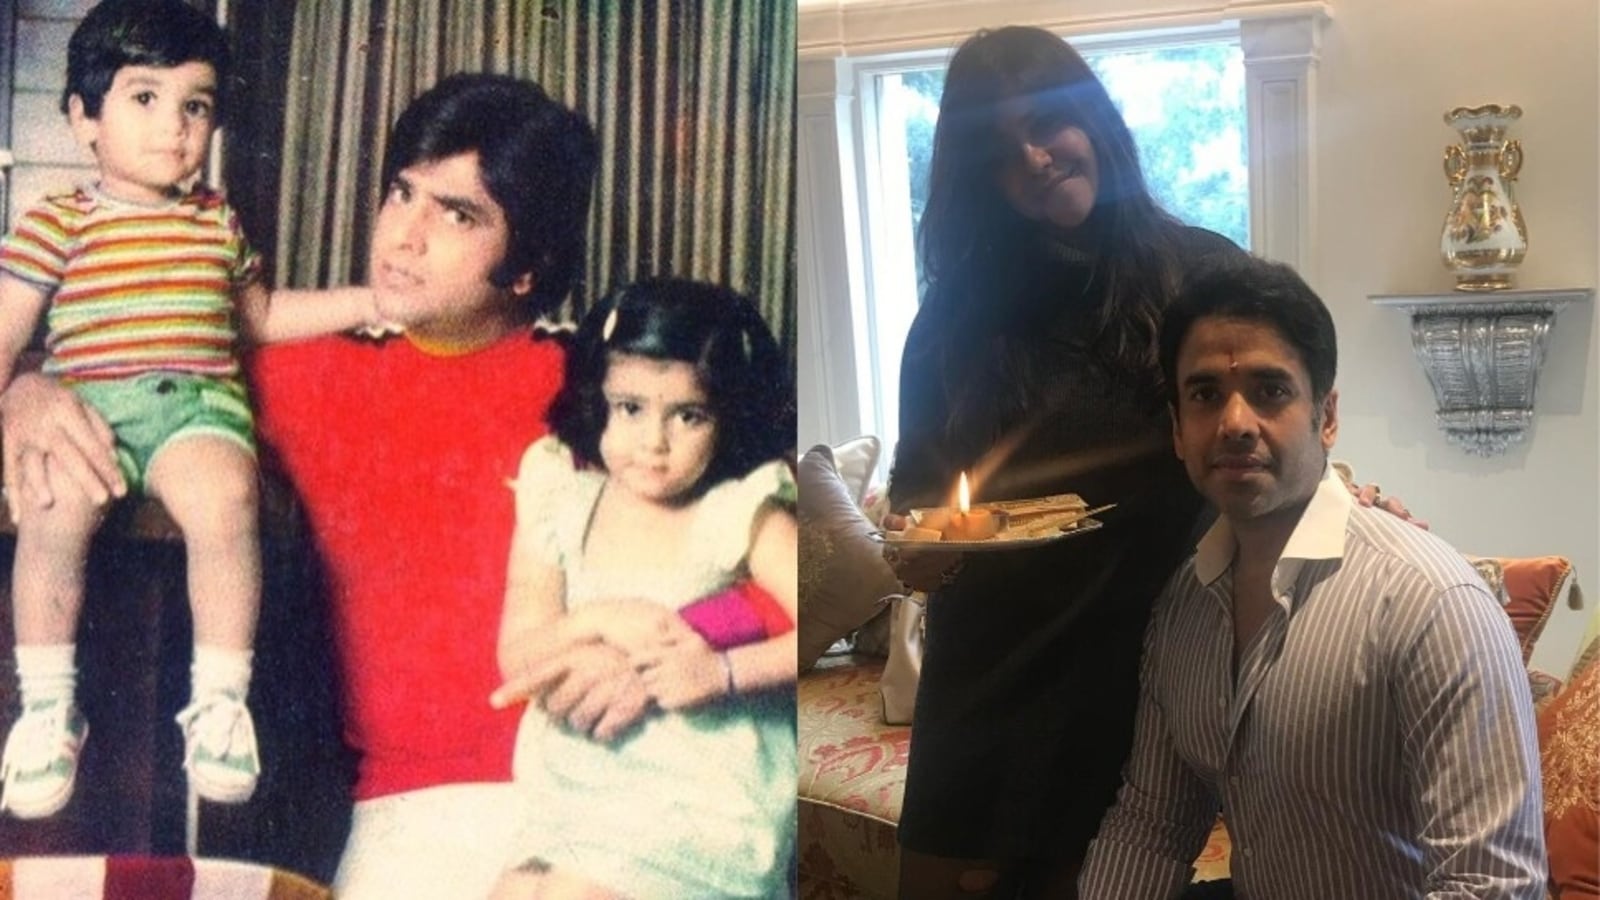 Tusshar Kapoor posts throwback with Ekta Kapoor, Jeetendra on her birthday, reveals they ‘loved watching Ramsay movies’